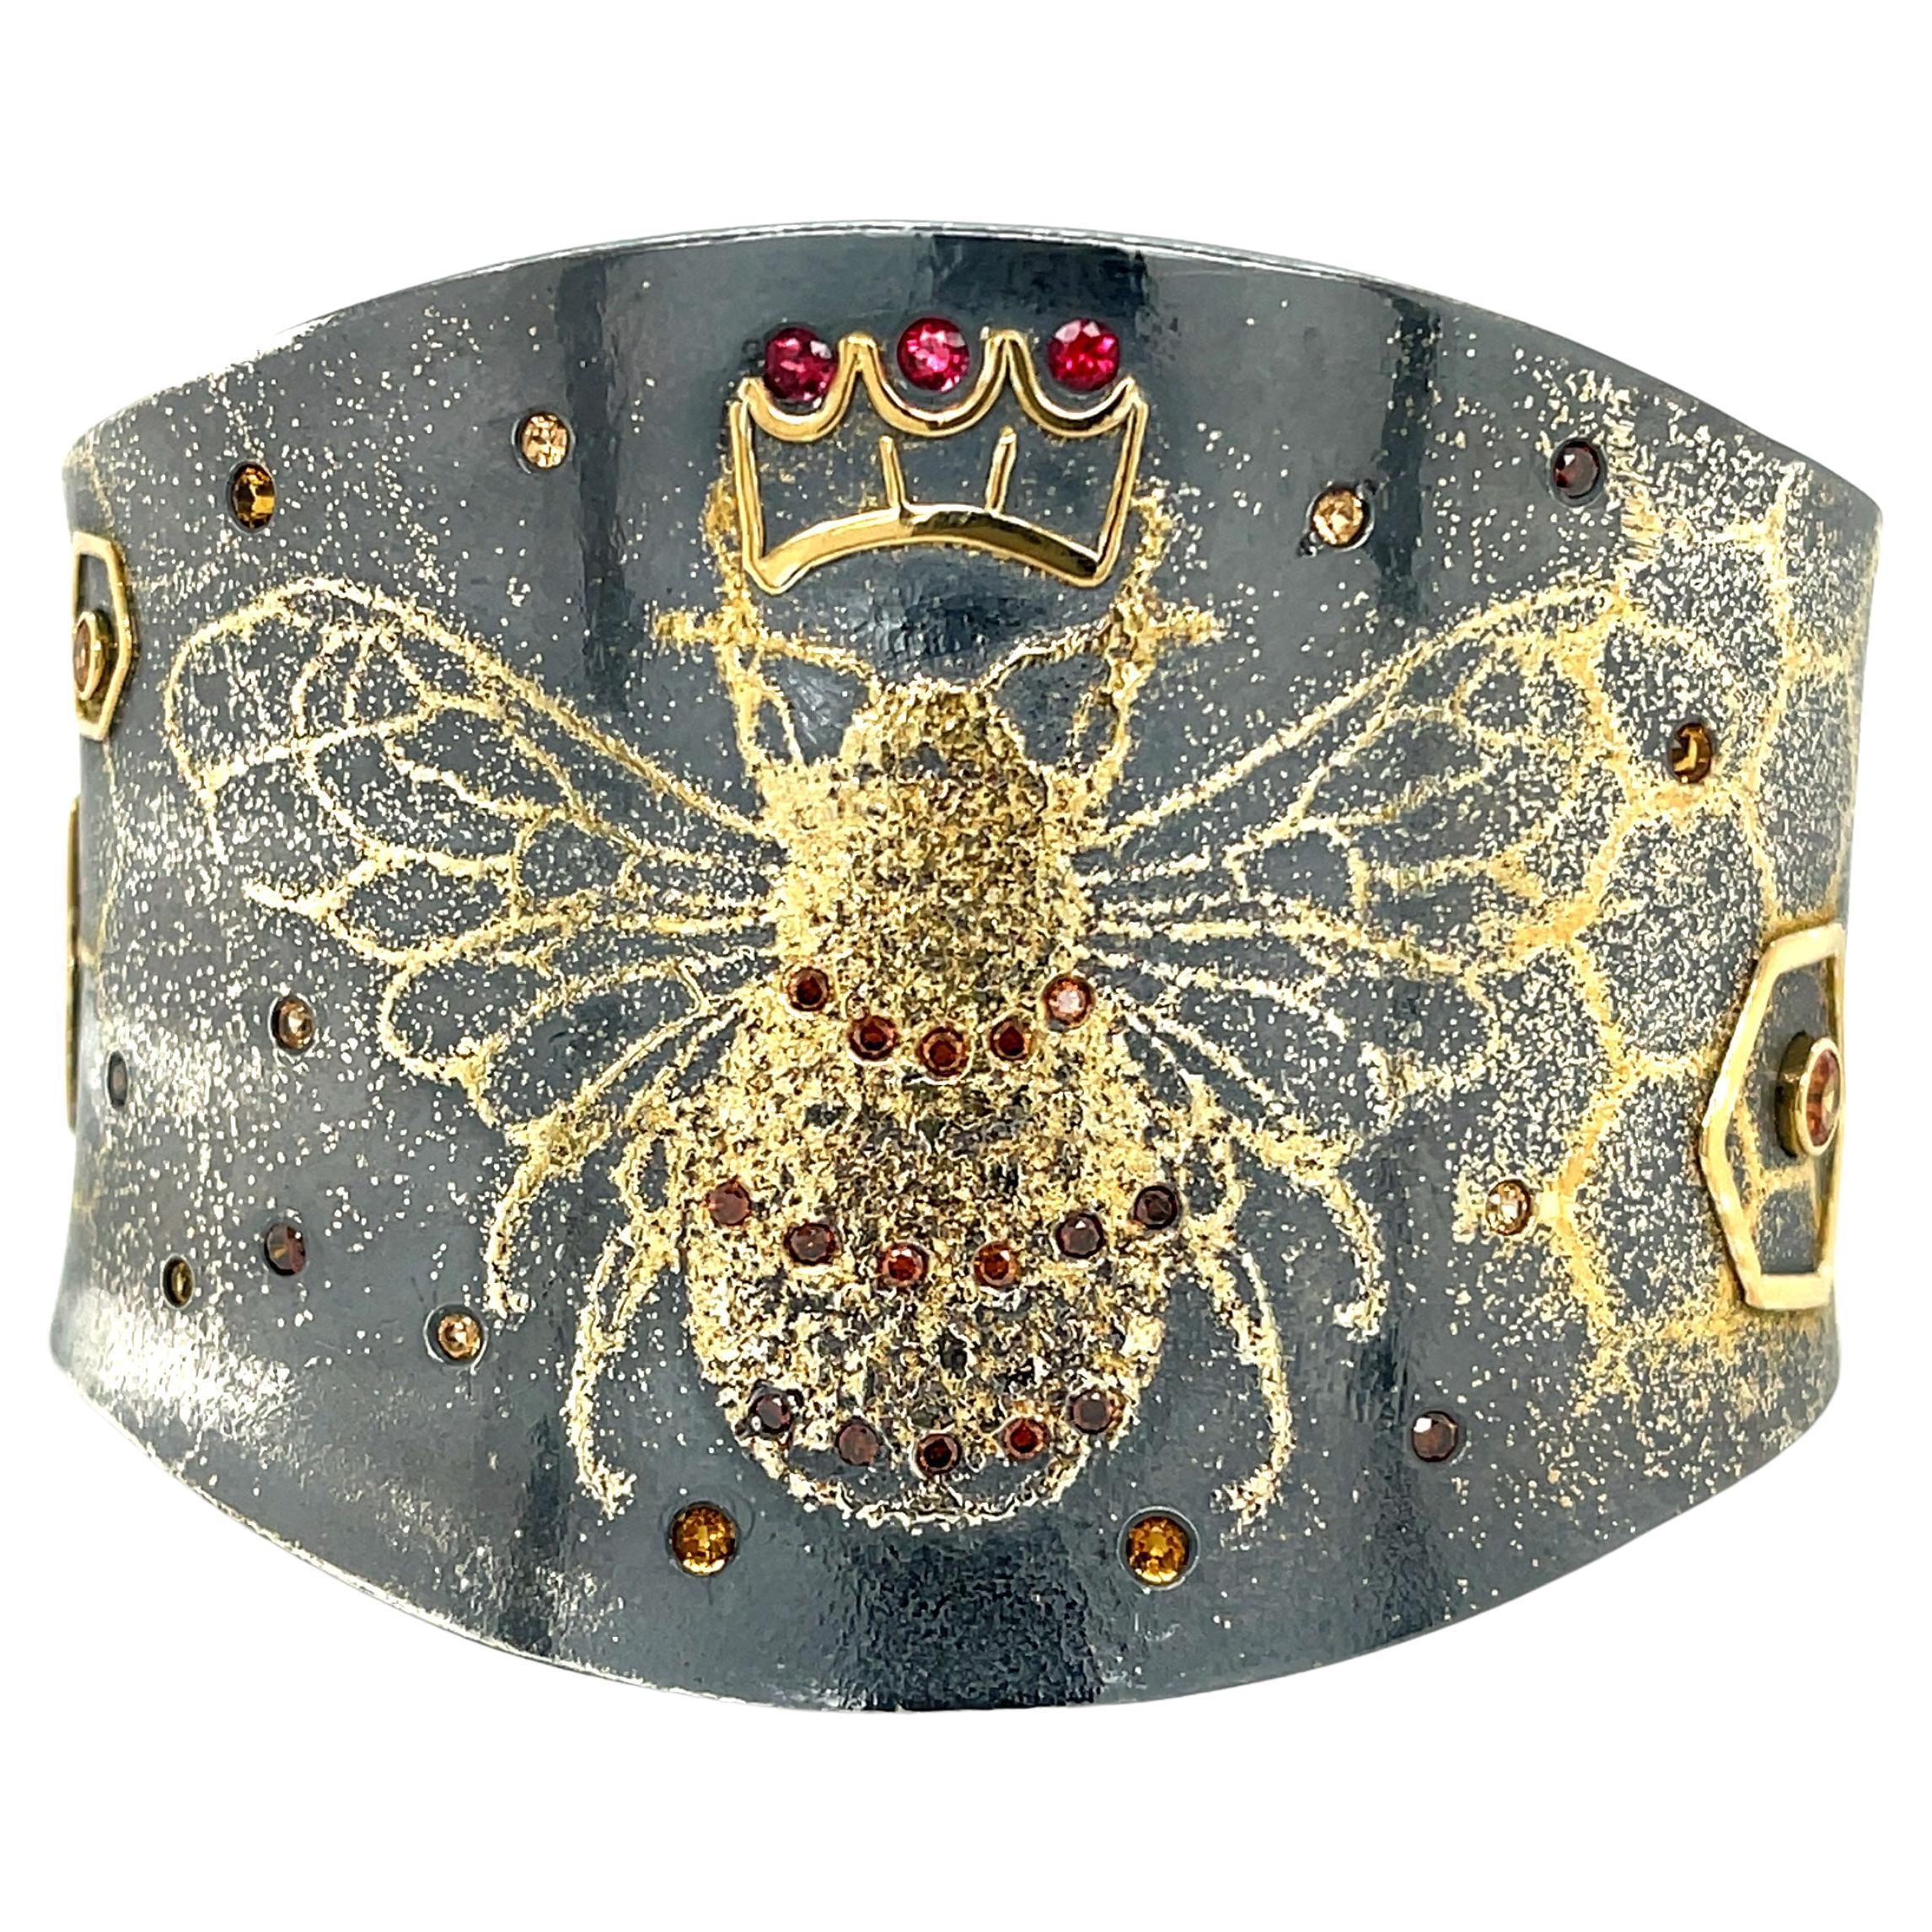 "Bee Strong" Cuff Bracelet with Oxidized Sterling Silver and 24Karat Gold Dust For Sale